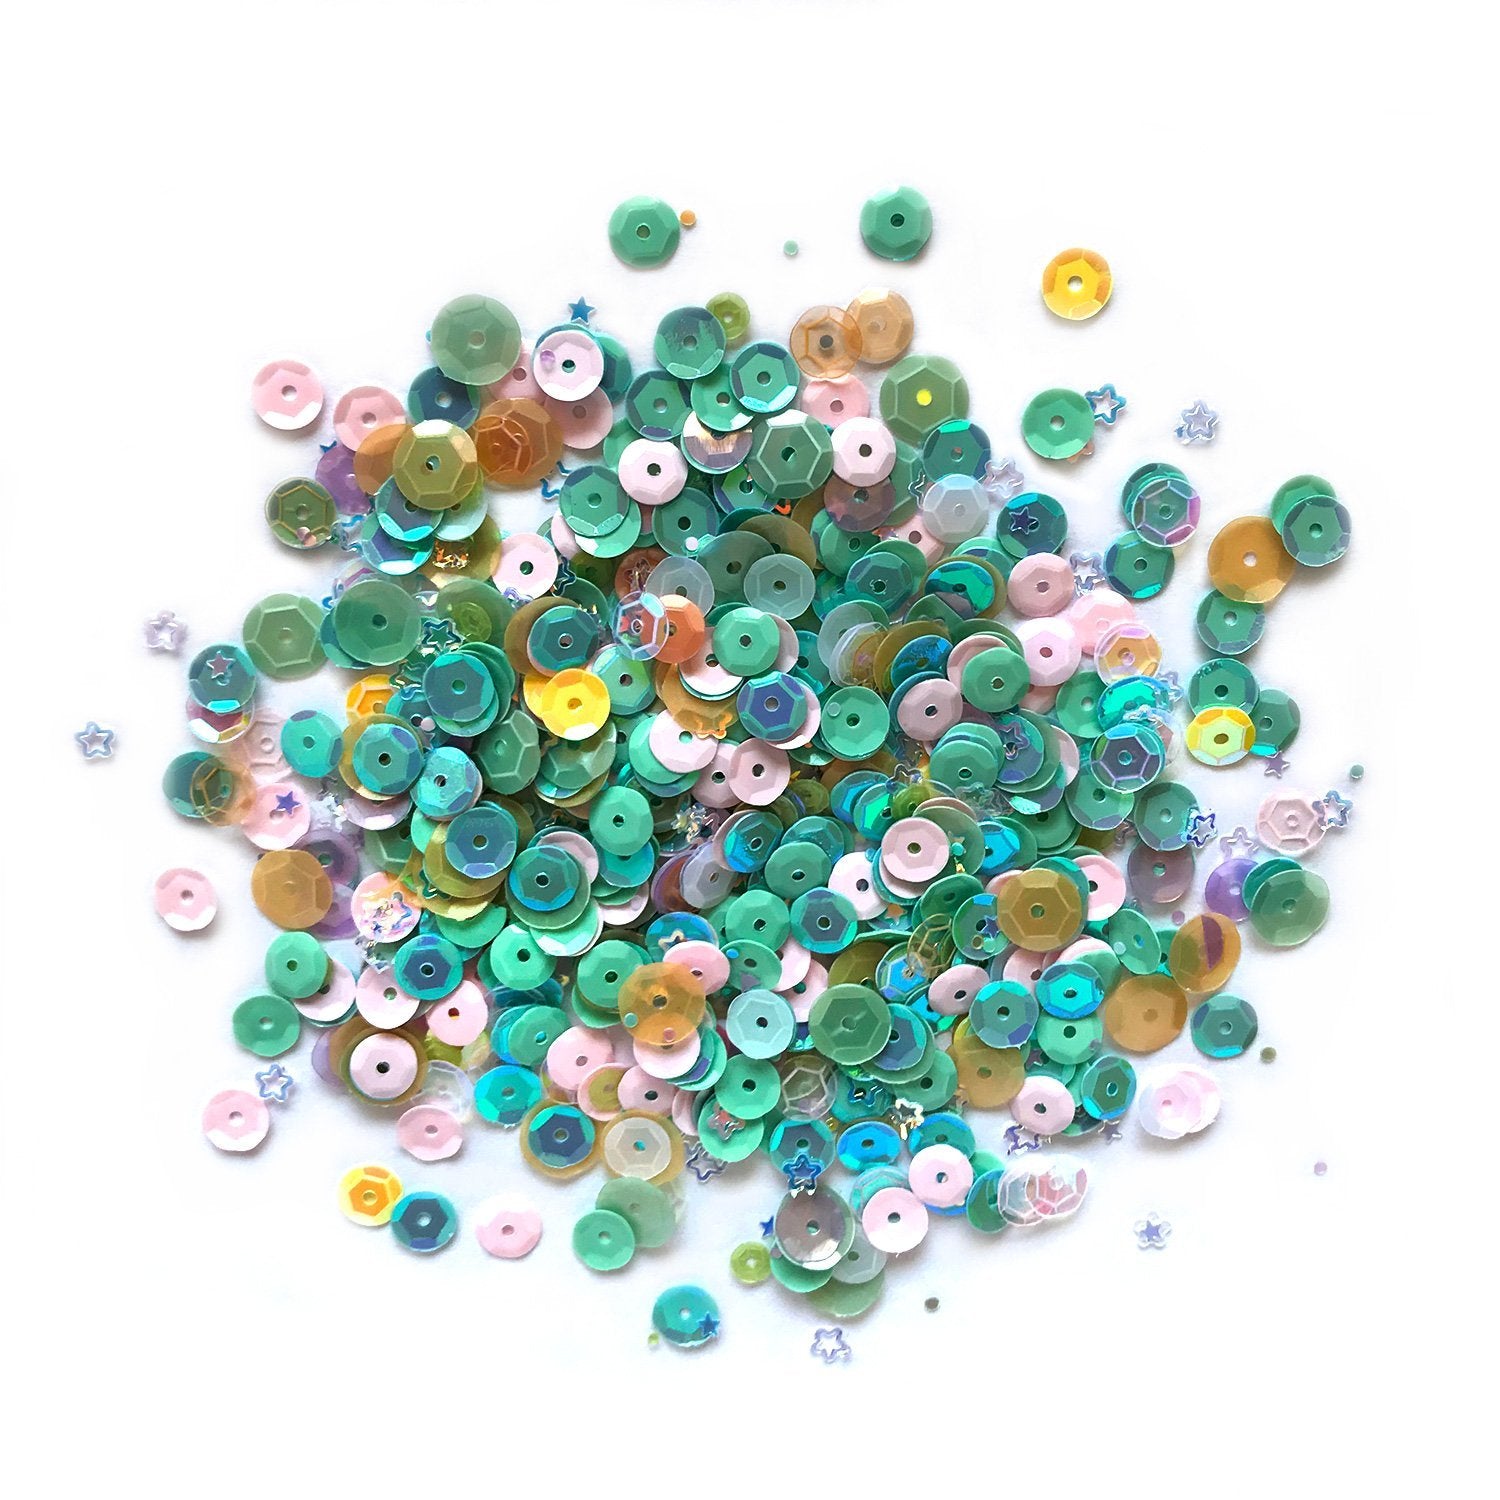 MajorCrafts 50grams 6mm Mixed AB Round Sew-On Cup Sequins